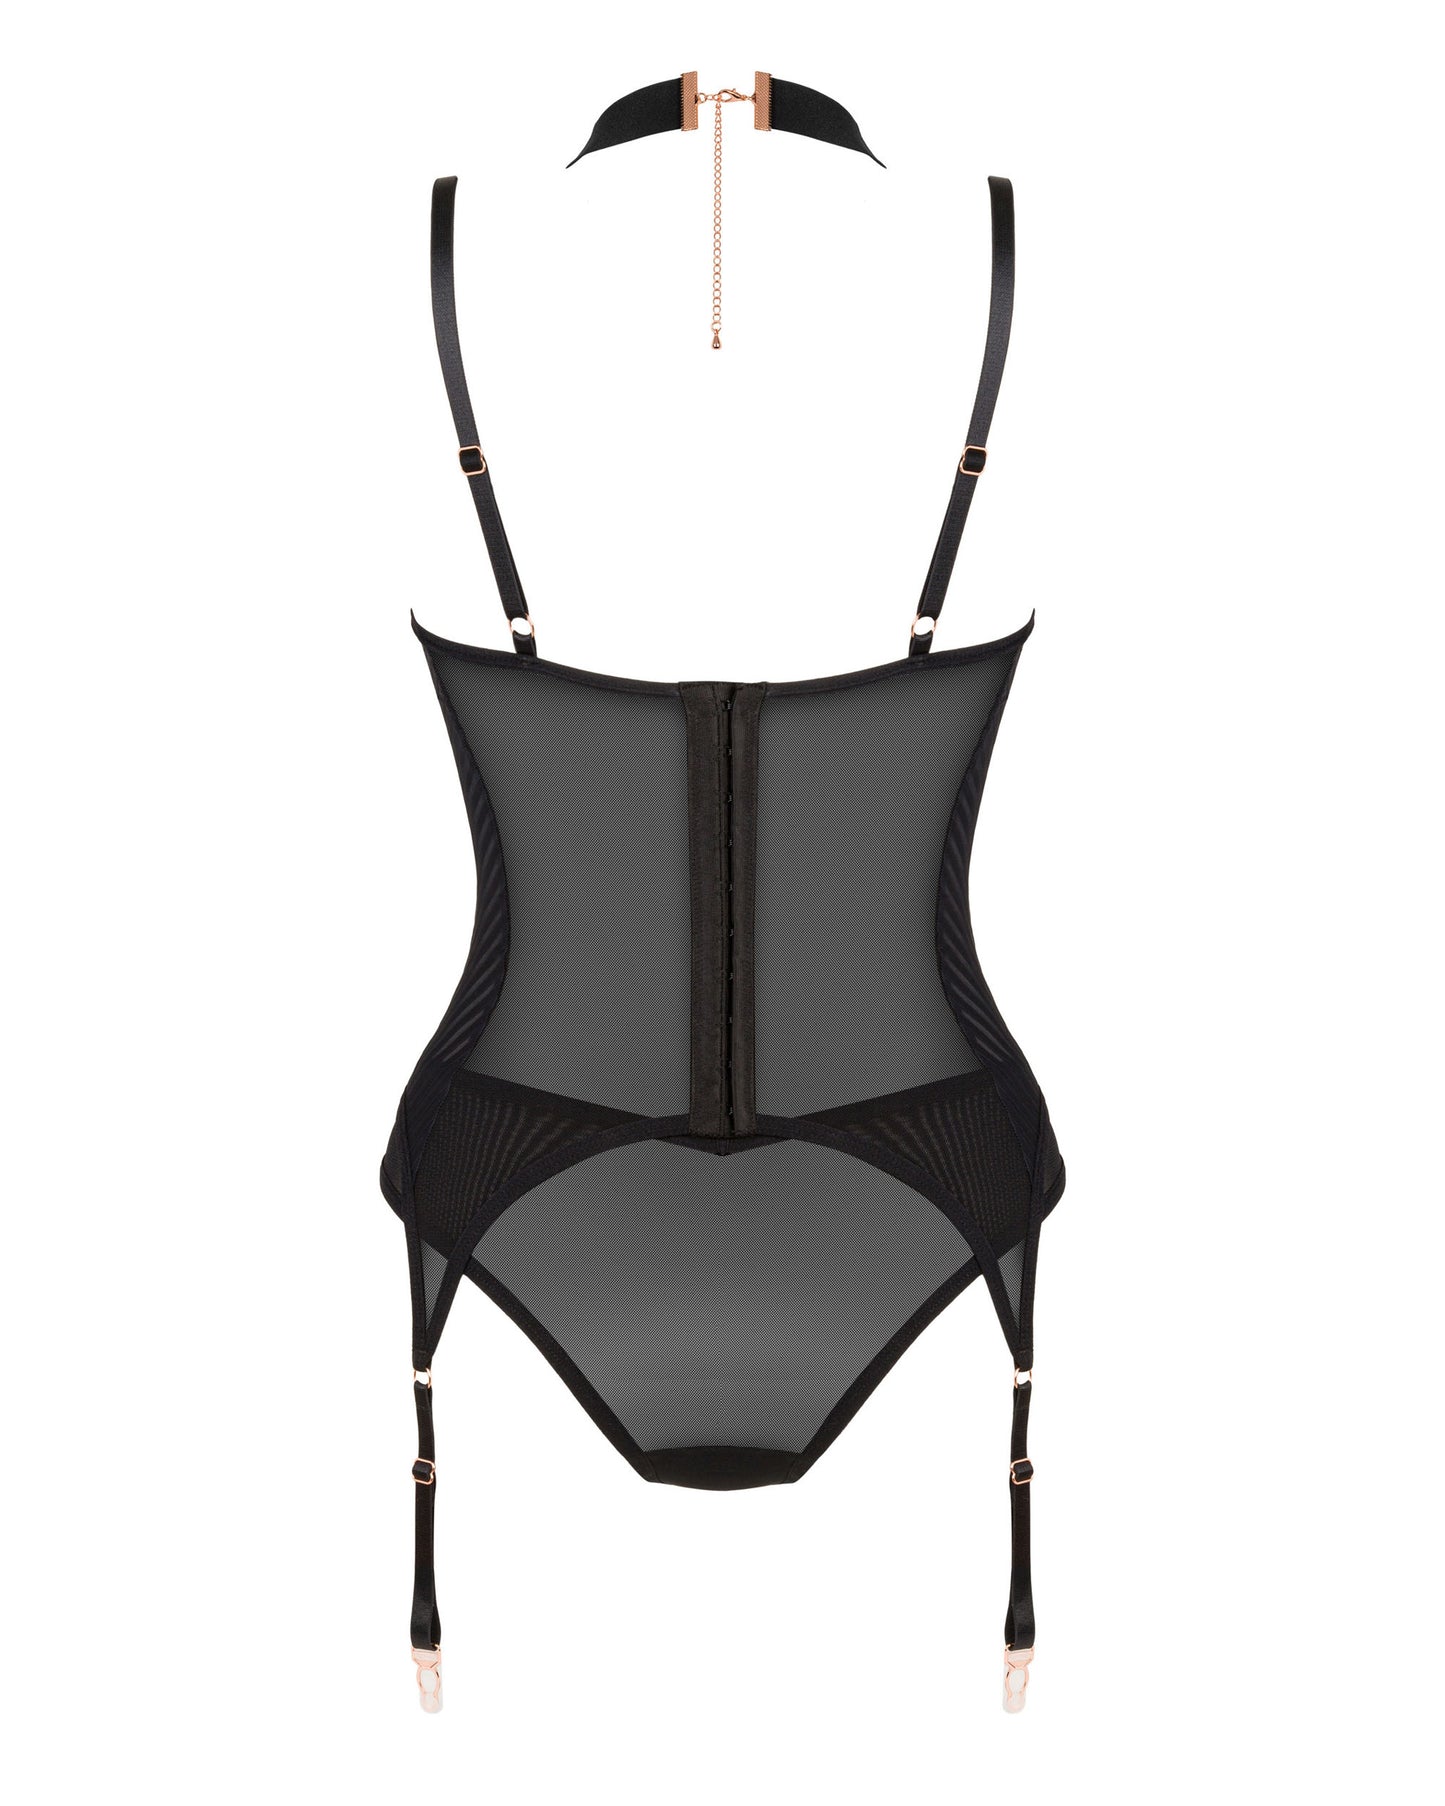 Corset and briefs made of translucent mesh and striped material